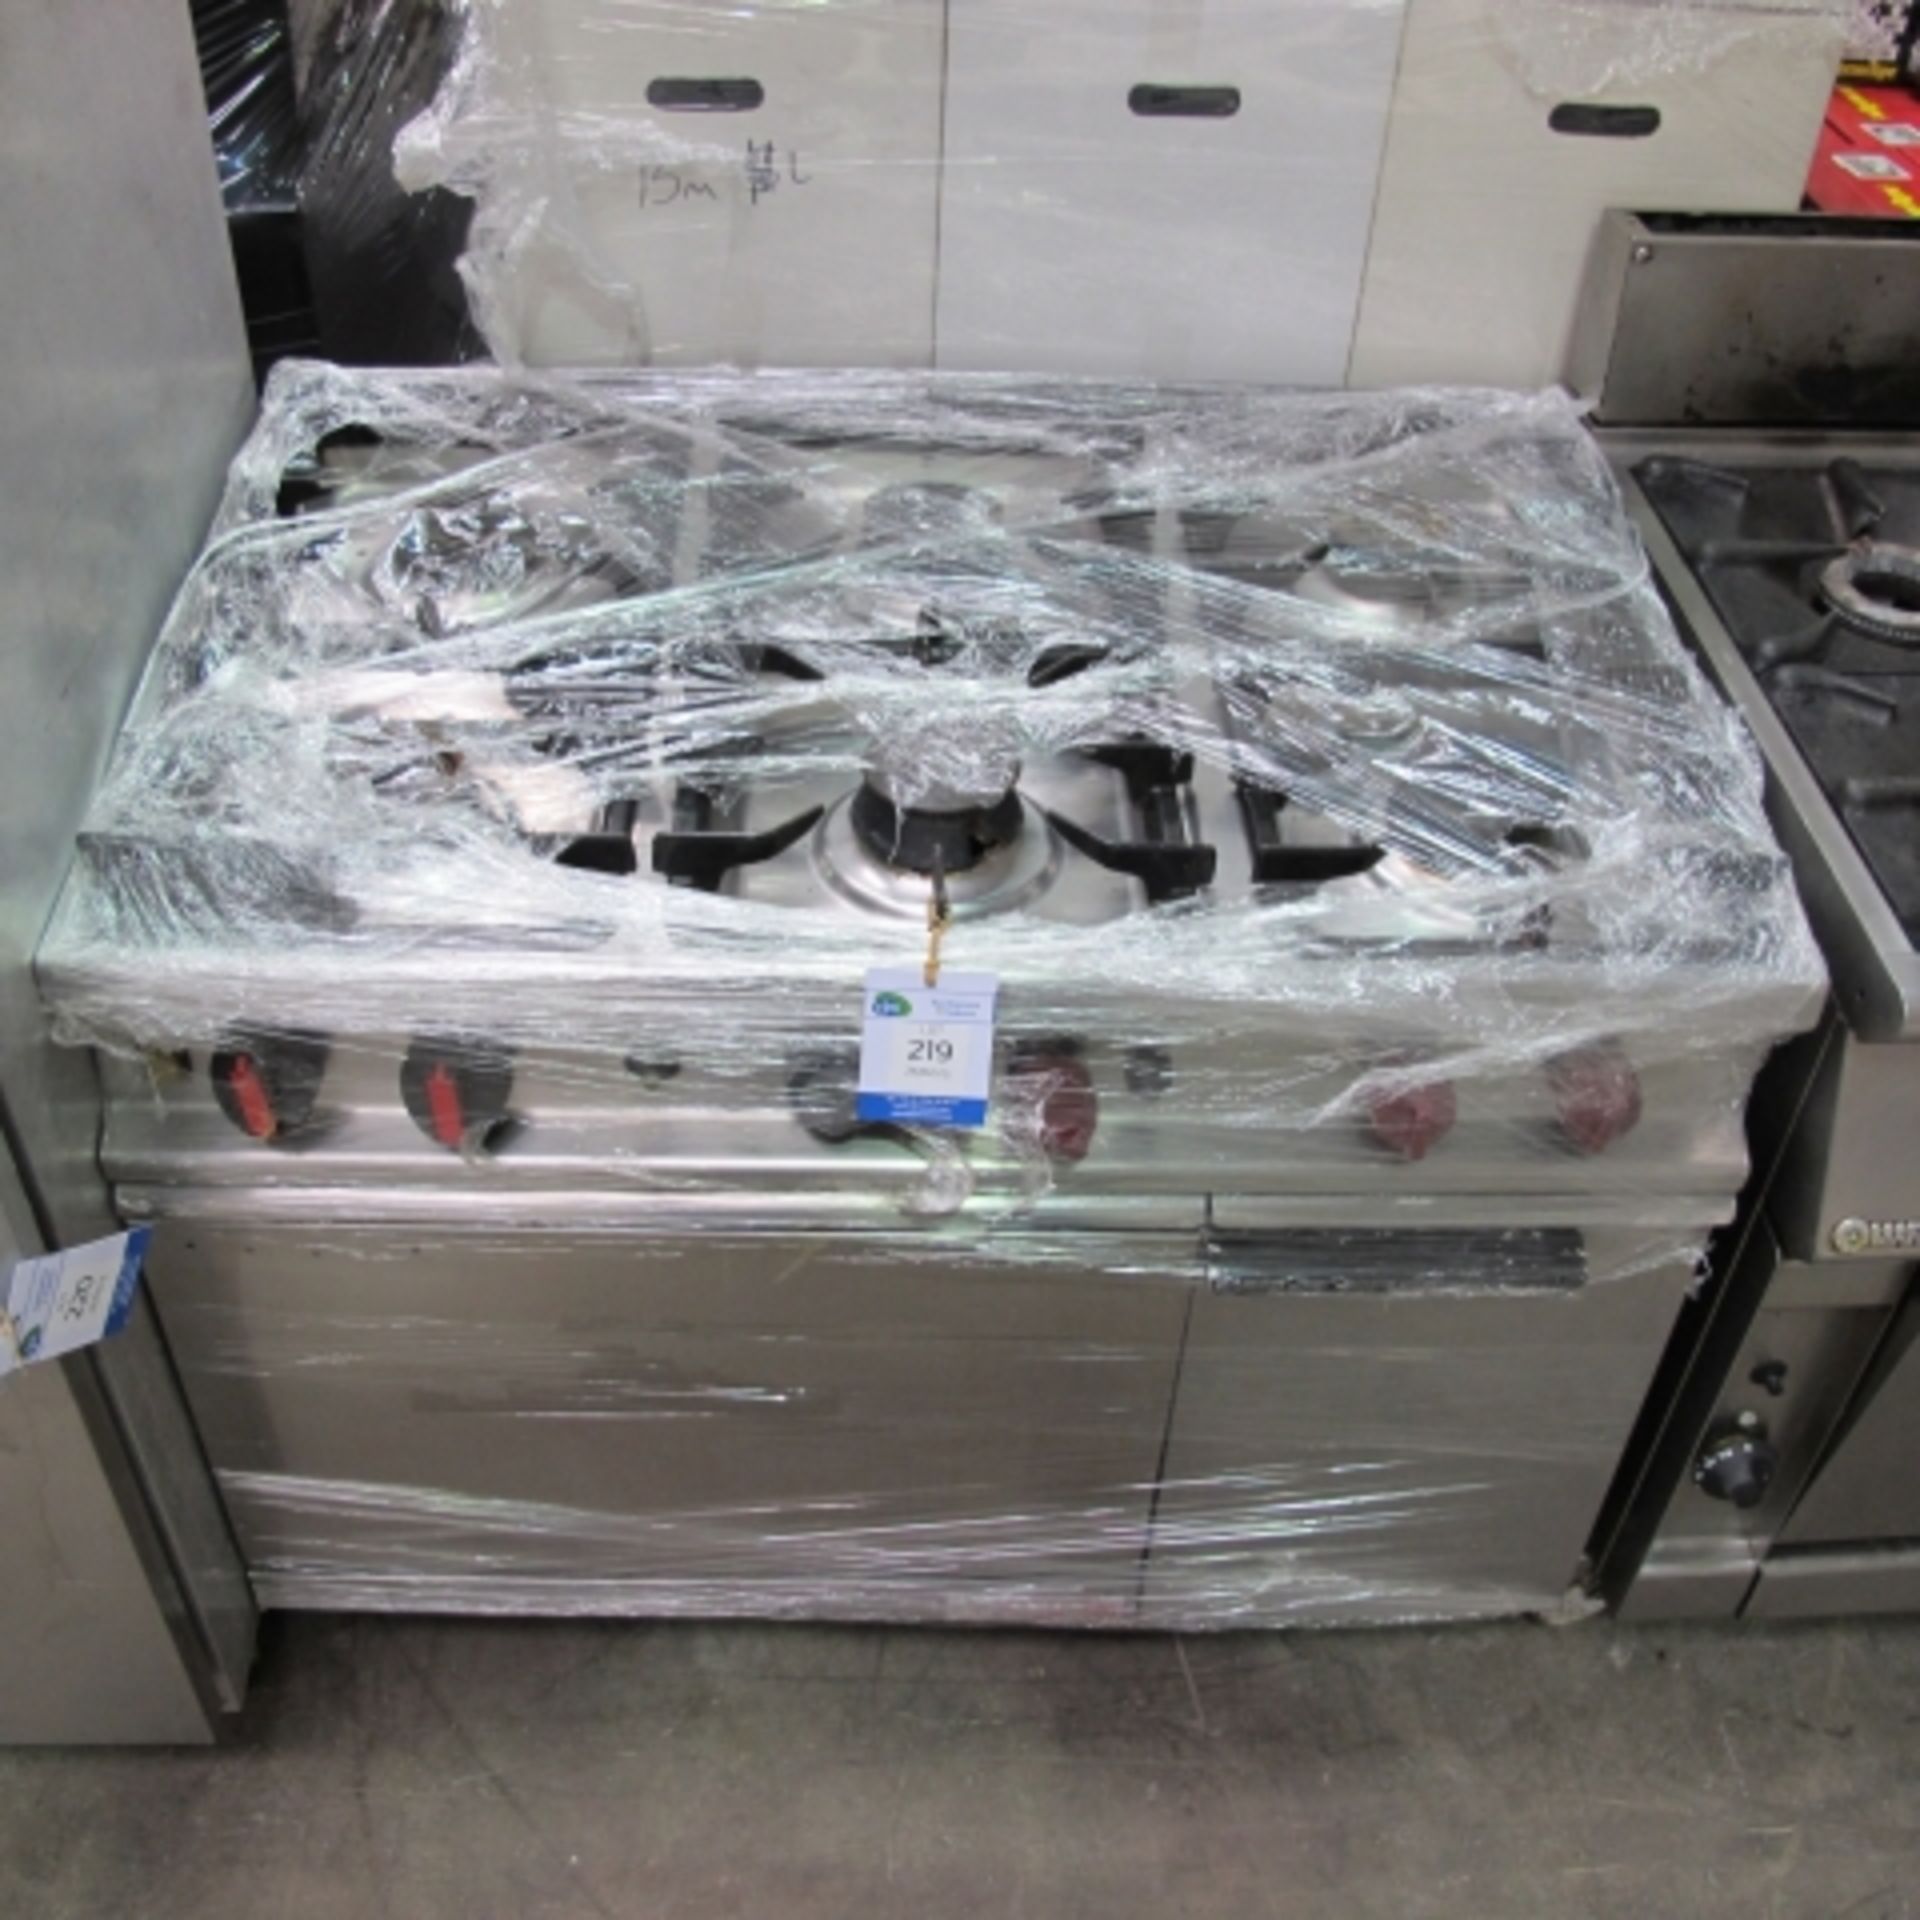 * Stainless Steel Commercial Gas Cooking Range with Six-Burner Hob.  Please note there is a £5